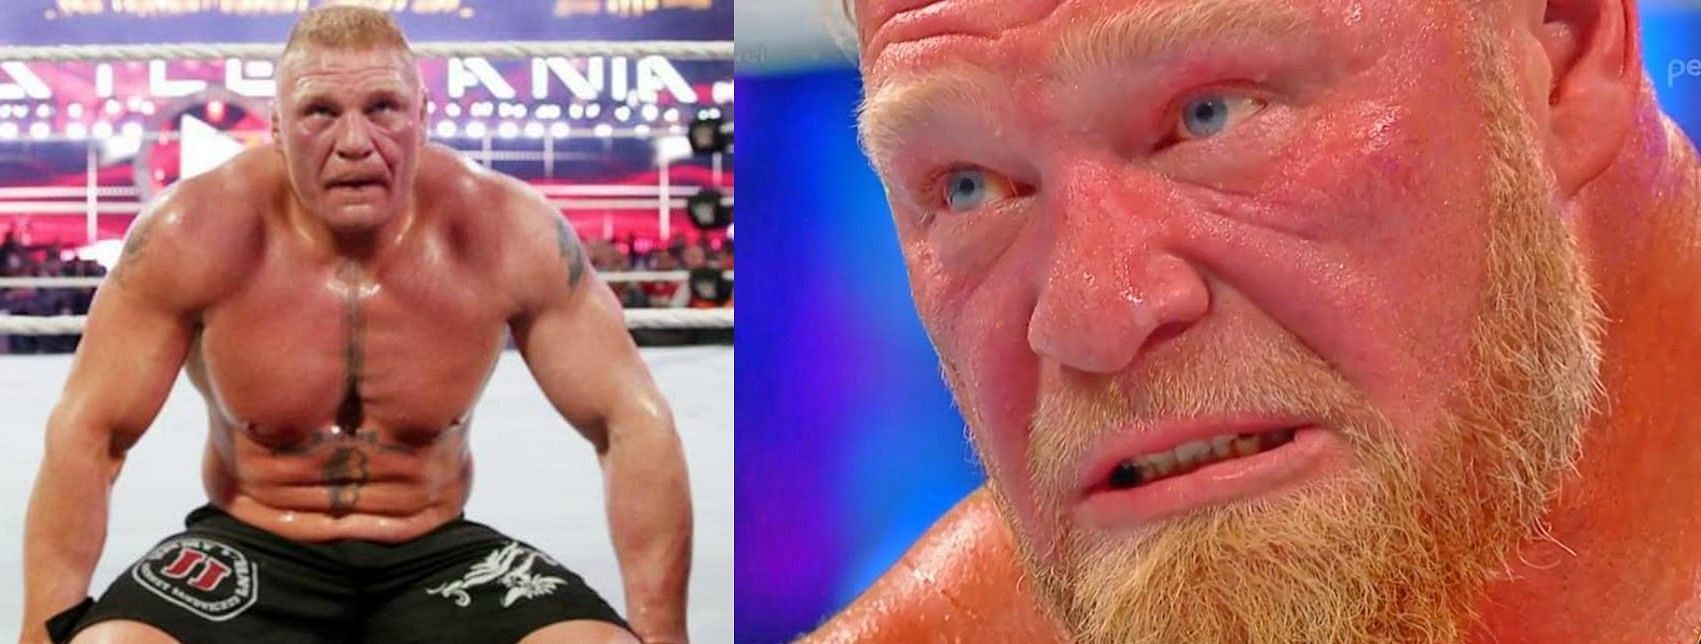 Brock Lesnar will go to war with Cody Rhodes at SummerSlam.